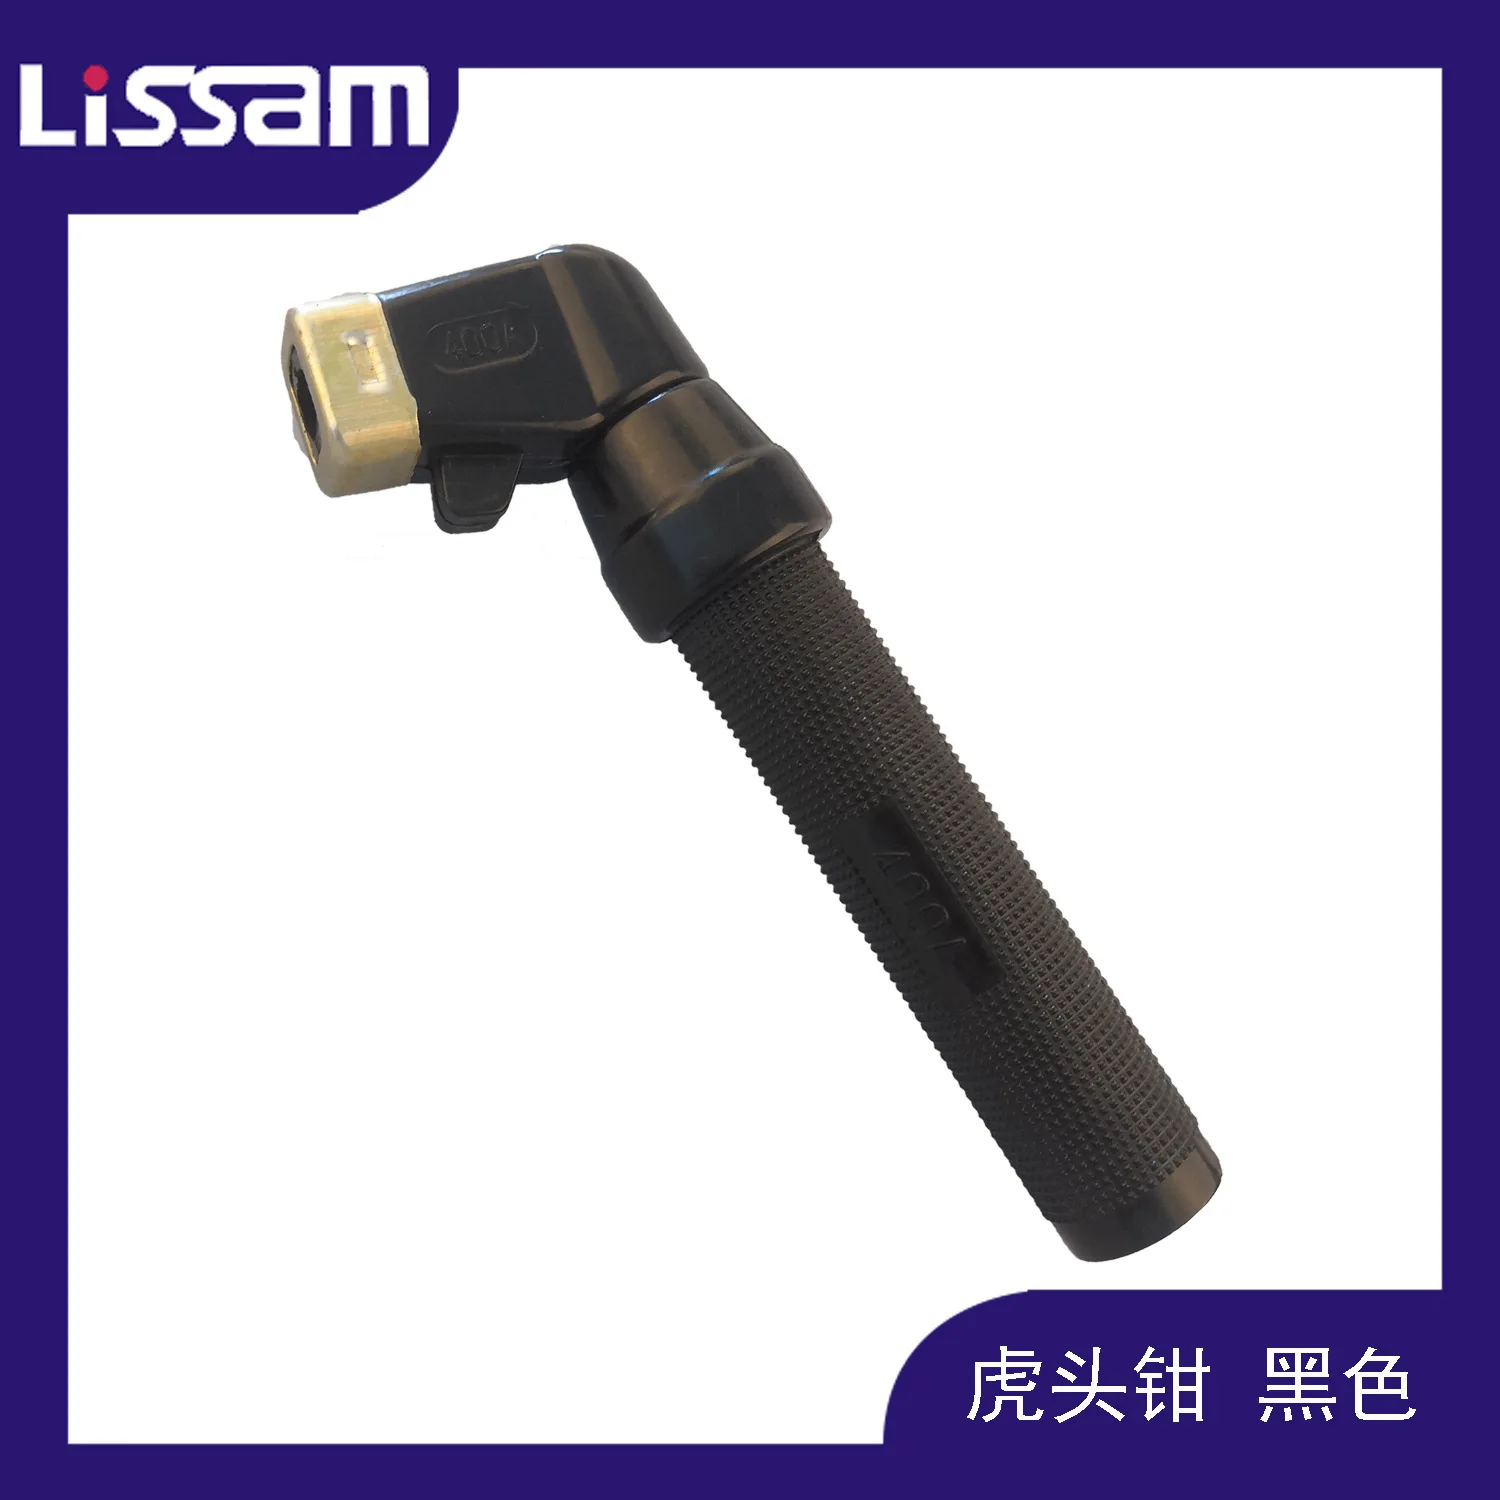 Professional 400A Twist Welding Electrode Holder 1.6-6.4mm Electrodes Clamp Forged Copper Tooth EN 60974-11 CE Welder Clamp